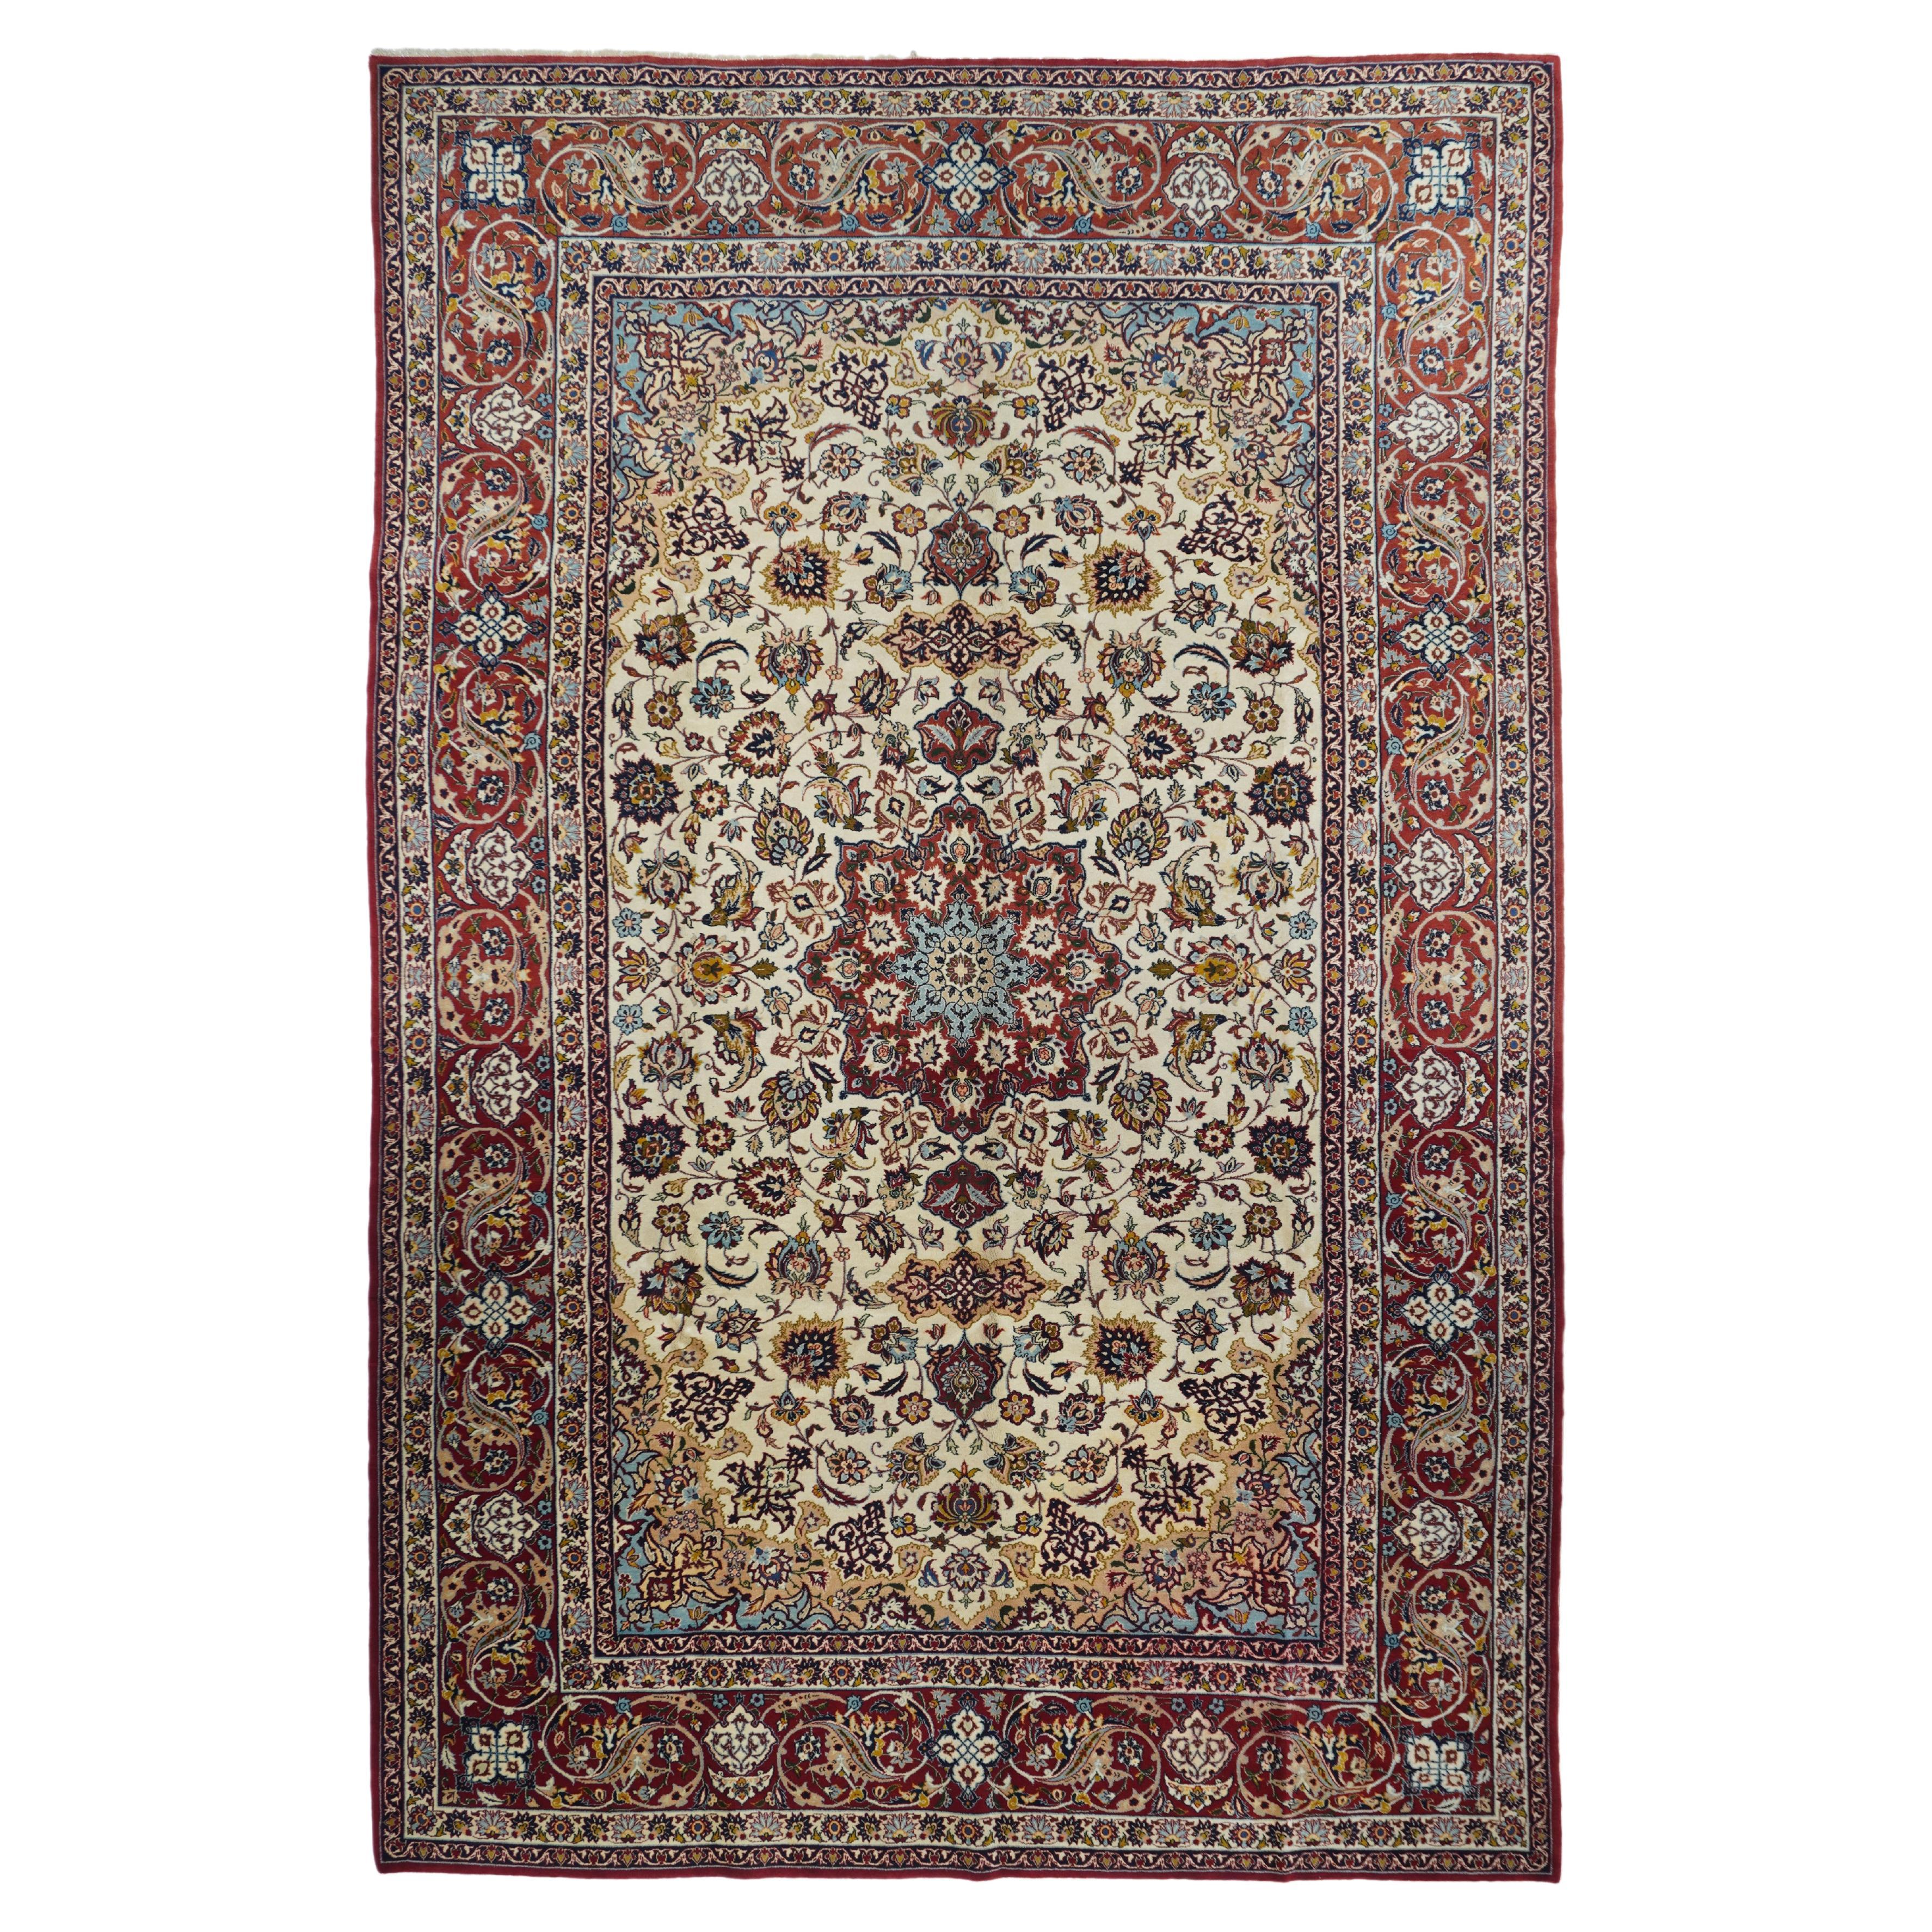 Antique Isfahan Rug